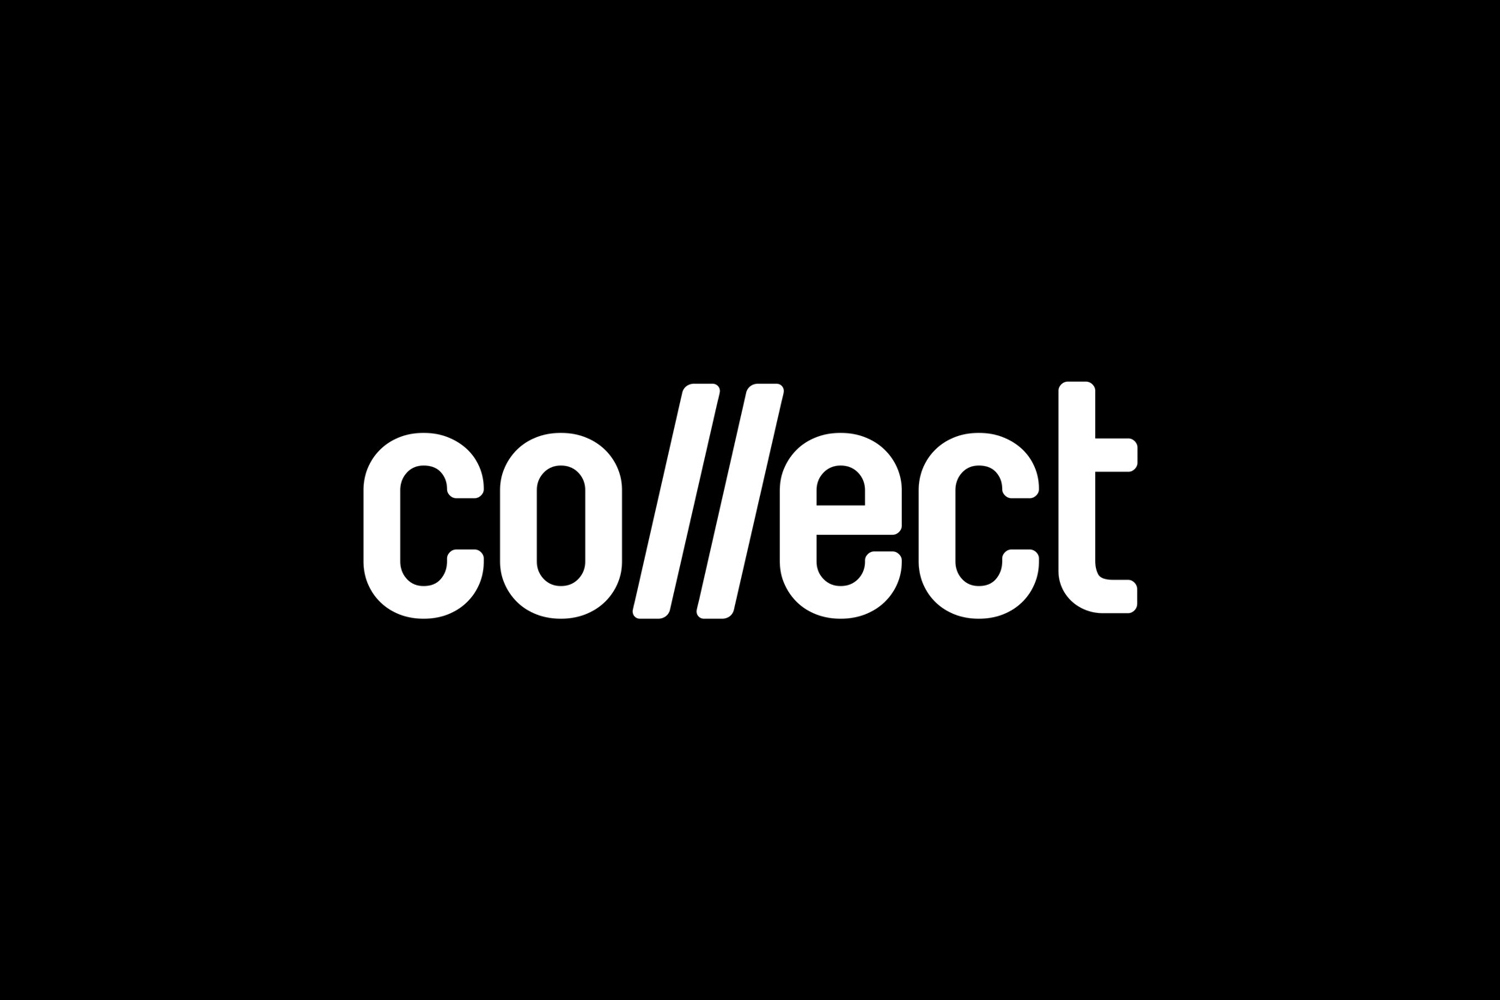 Creative Logotype Gallery & Inspiration: Collect by Spin, United Kingdom